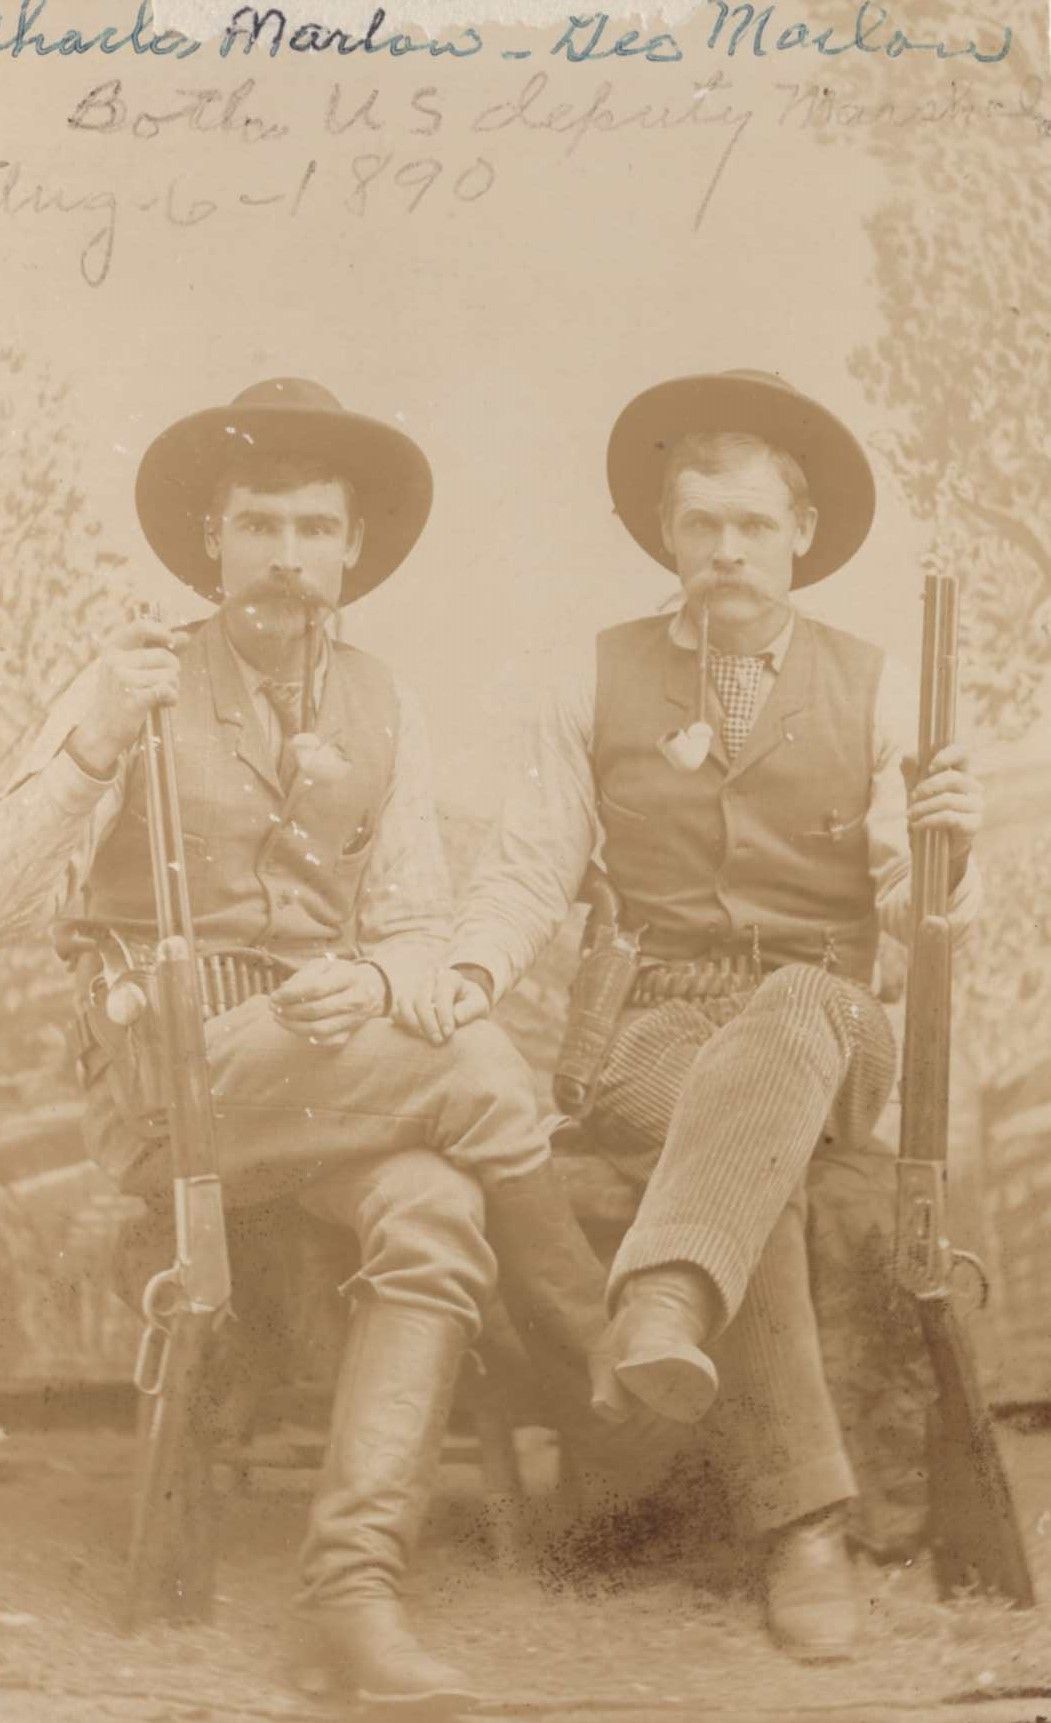 George and Charles Marlow of Ouray County